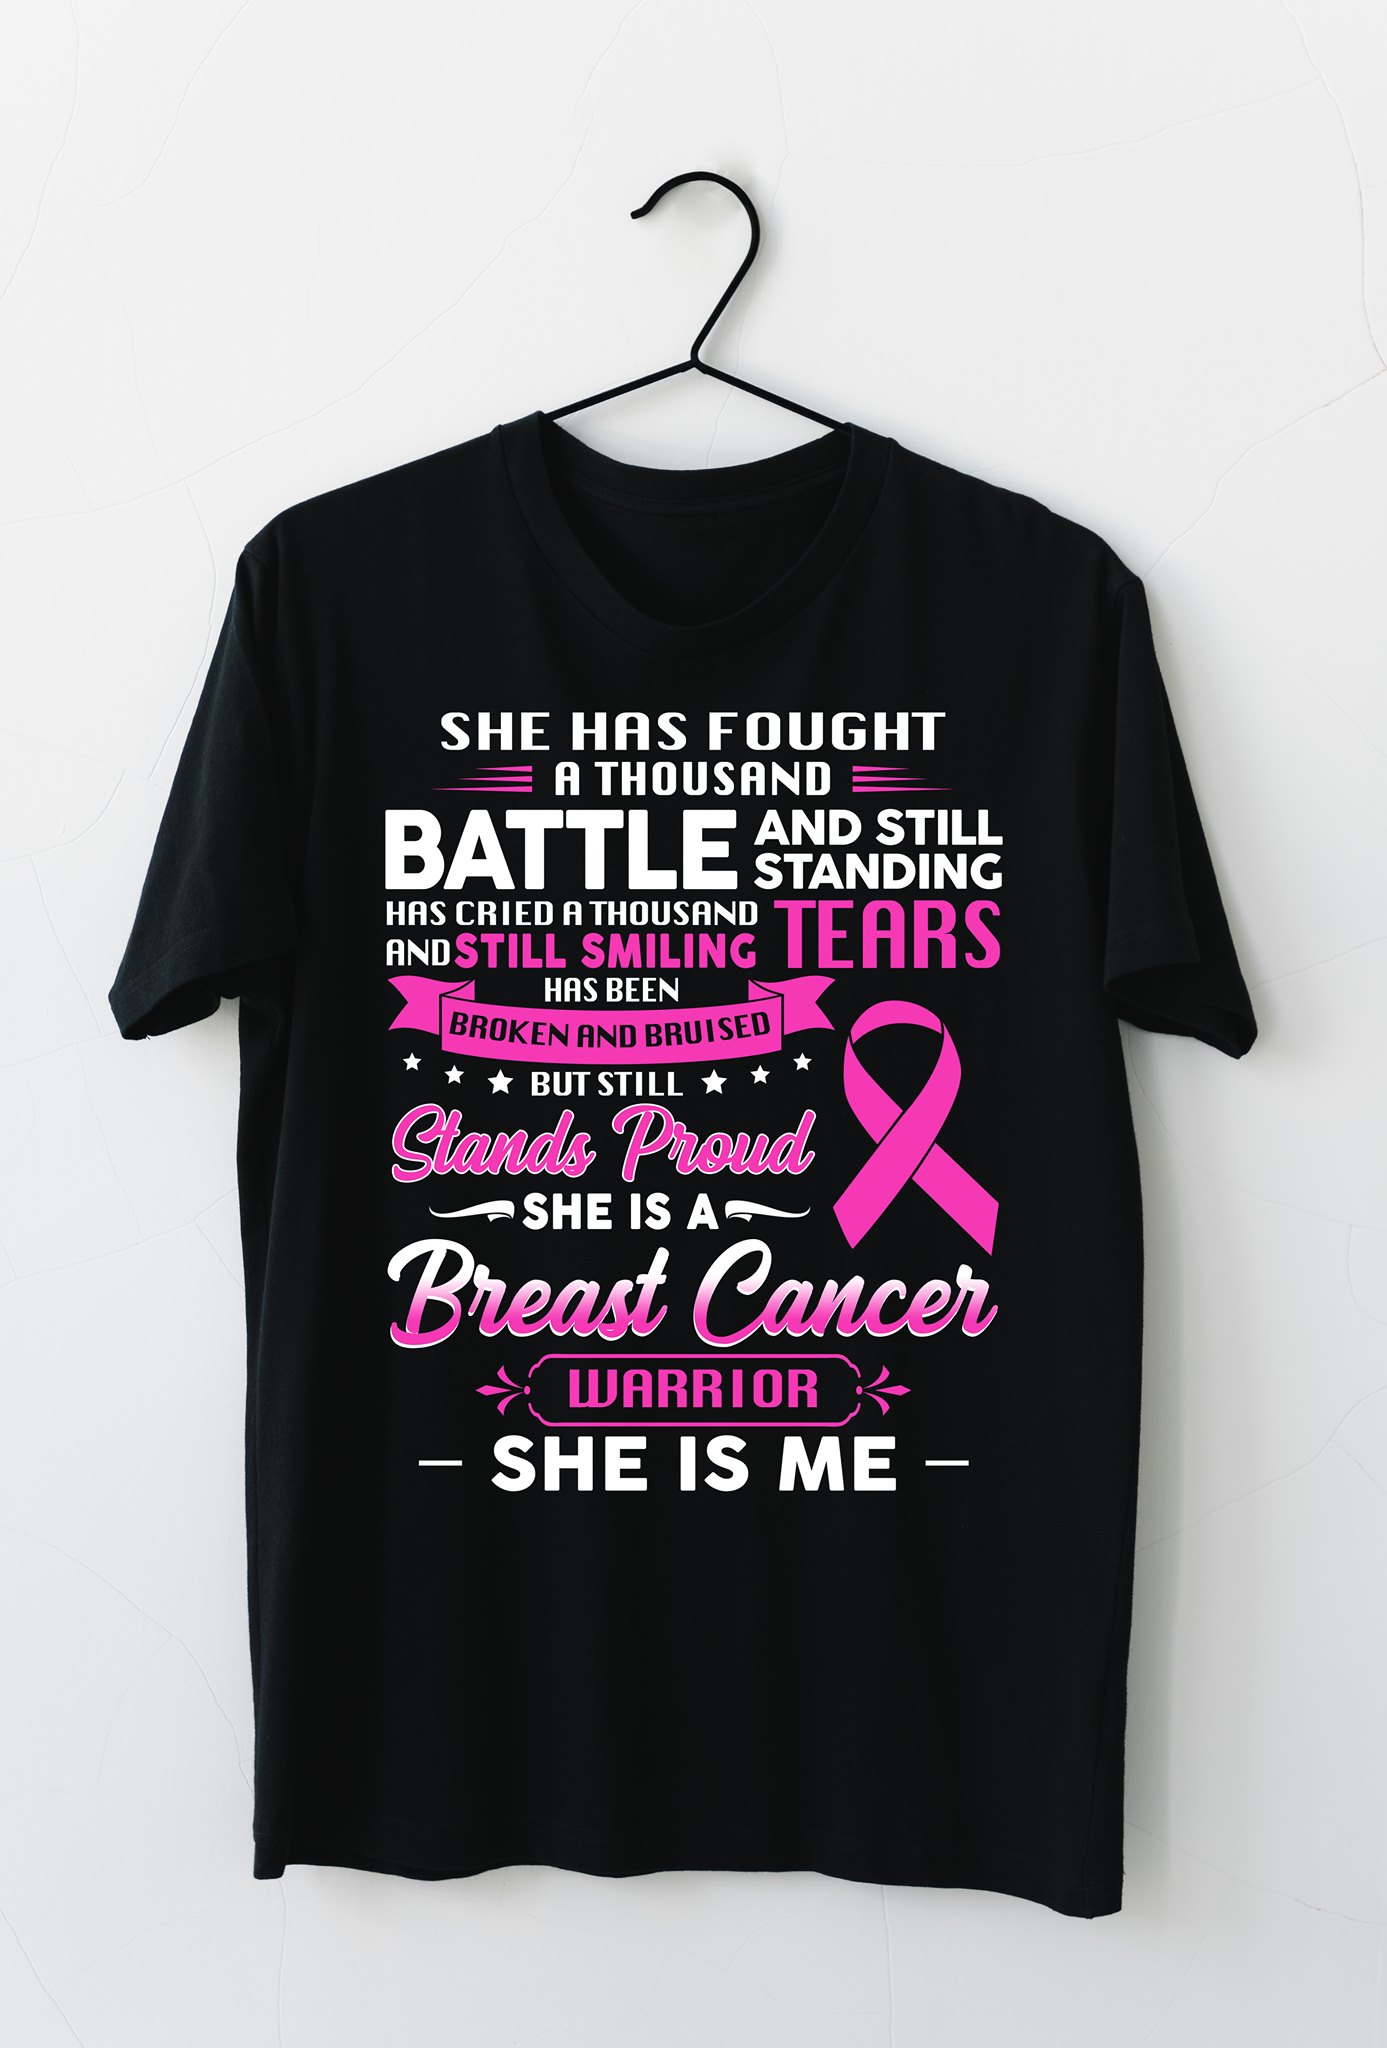 She has fought a thousand battle and still standing - She is breast cancer warrior